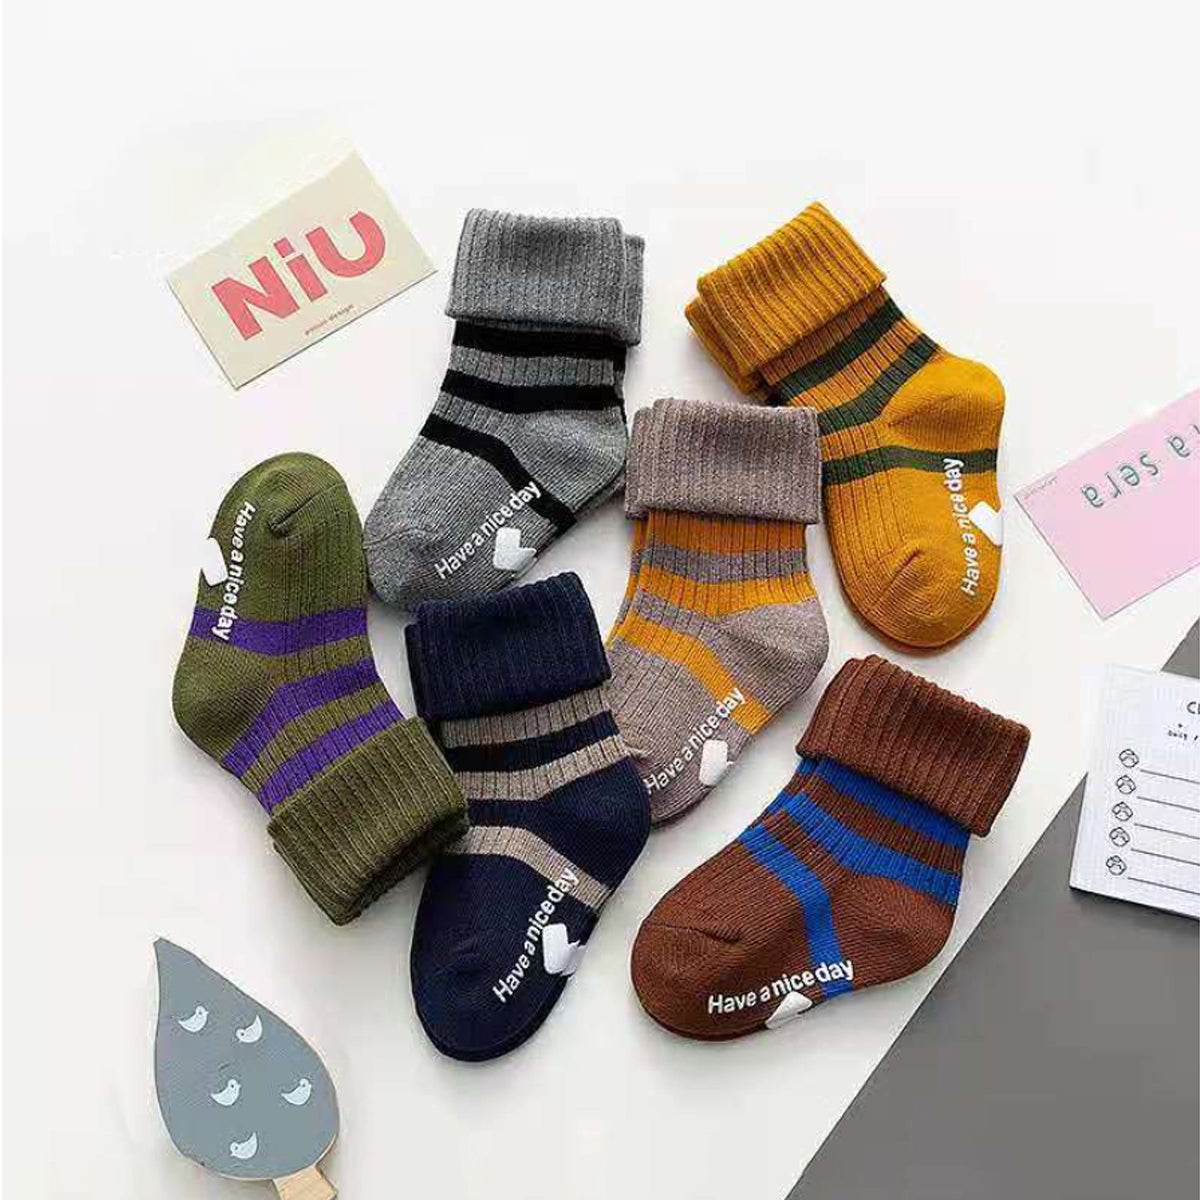 Have A Nice Day Soft and Comfortable Cotton Socks